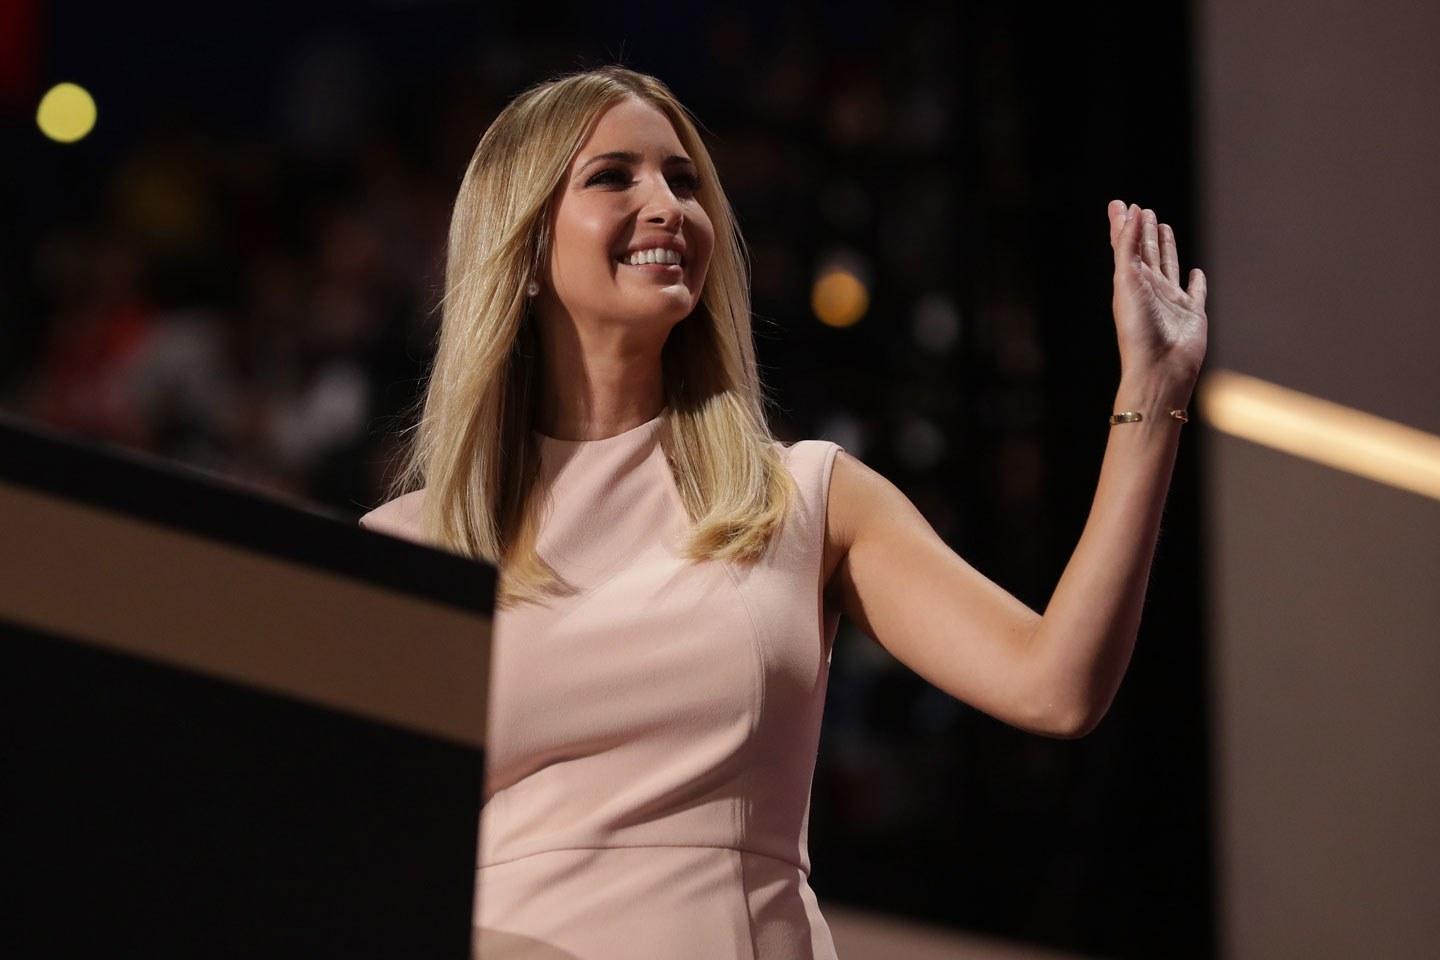 Ivanka Trump addresses the crowd at the 2016 Republican National Convention, where she delivered more liberal ideas which rounded out the more conservative ones of her father, Donald Trump.